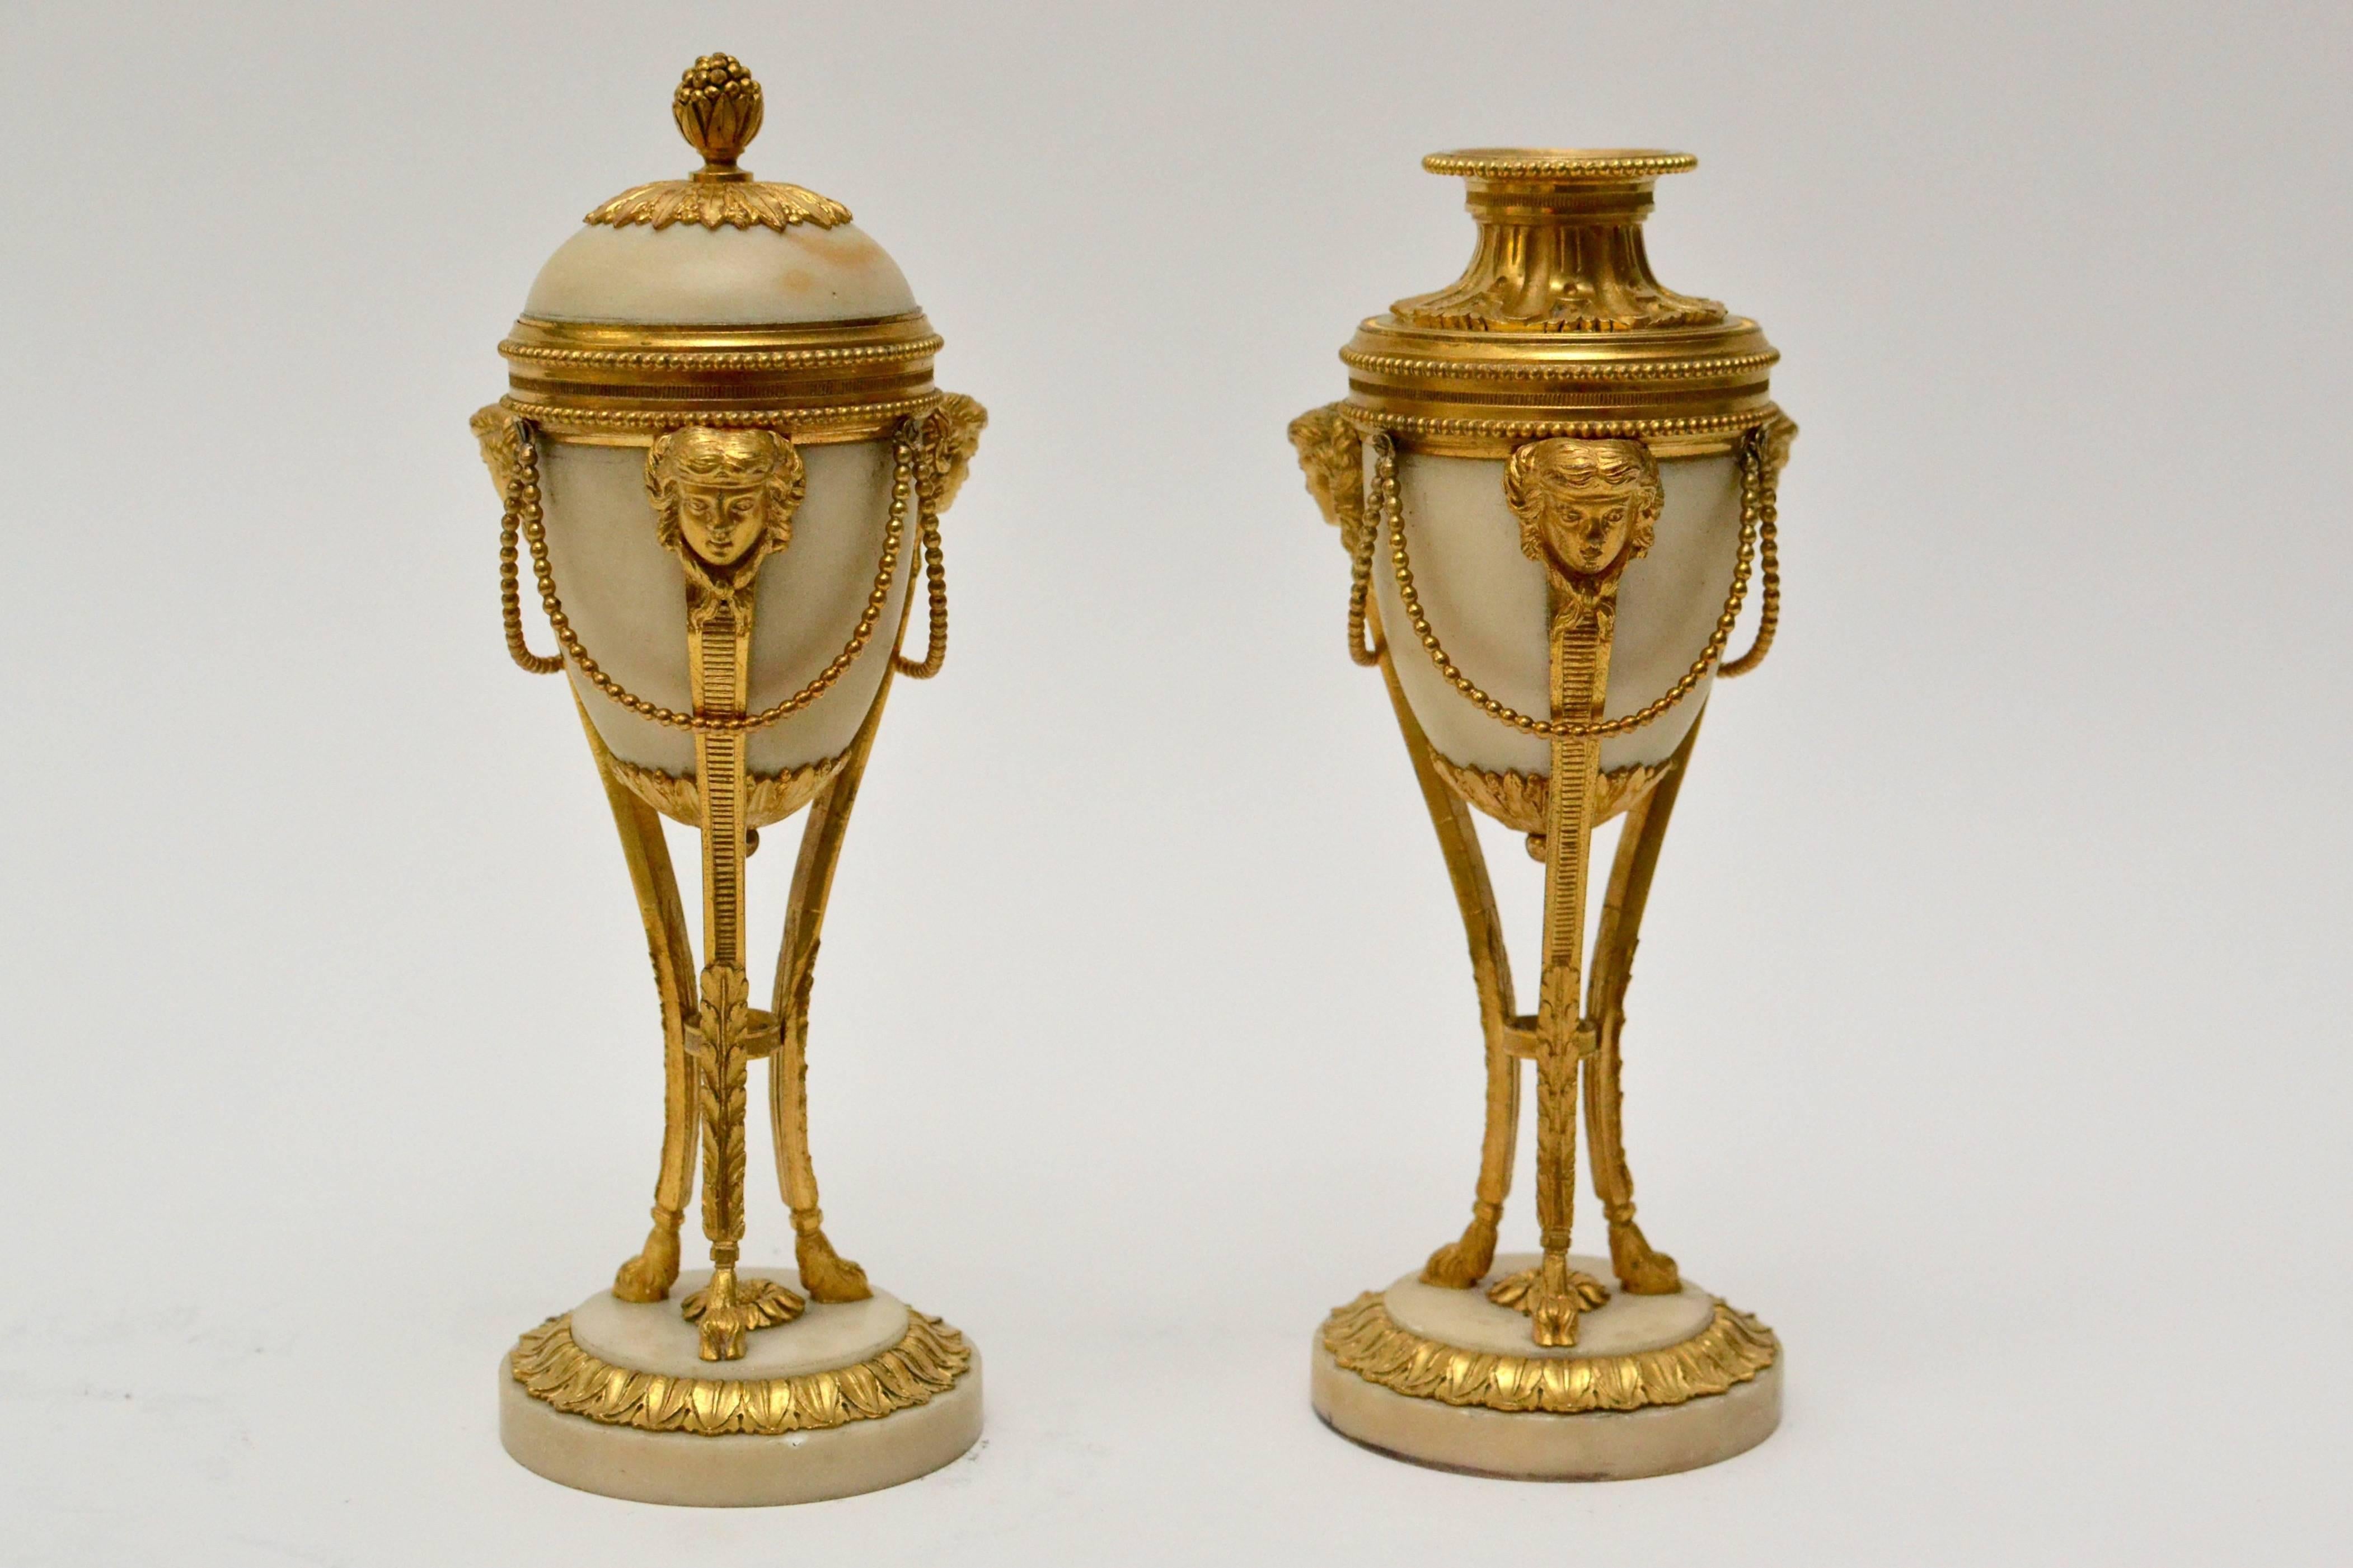 A pair of Louis XVI gilt bronze and white marble casolettes, late 18th century.